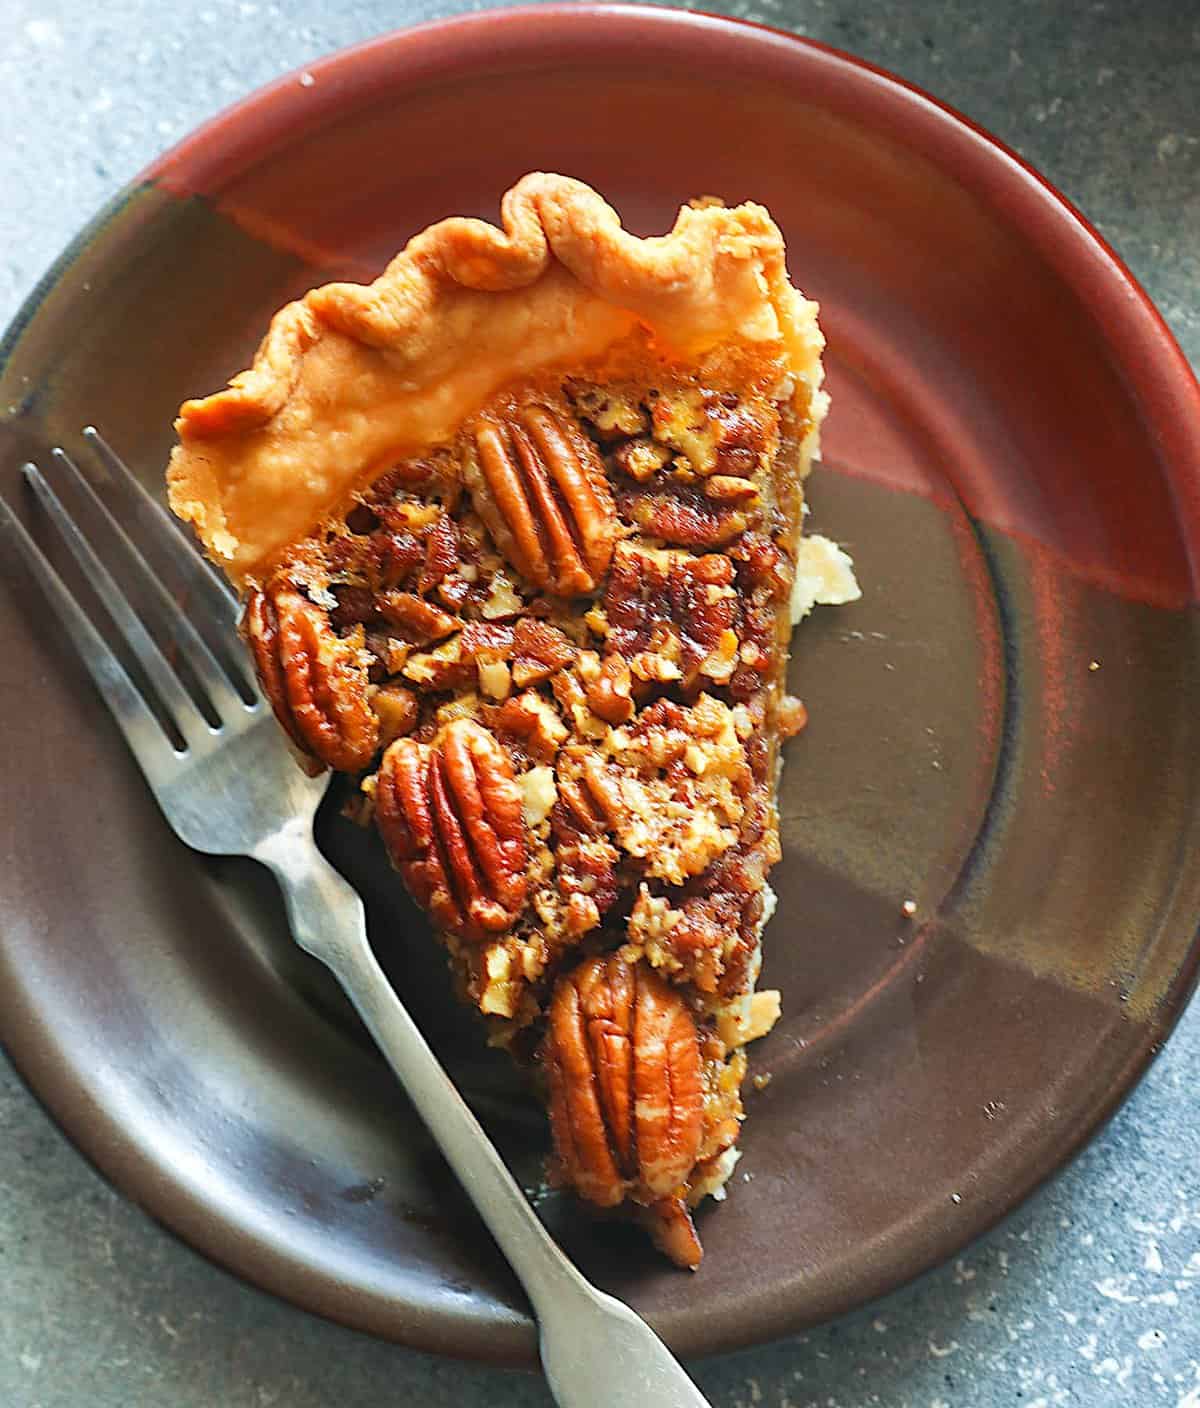 Serving up a slice delightfully sweet pecan pie made with no syrup